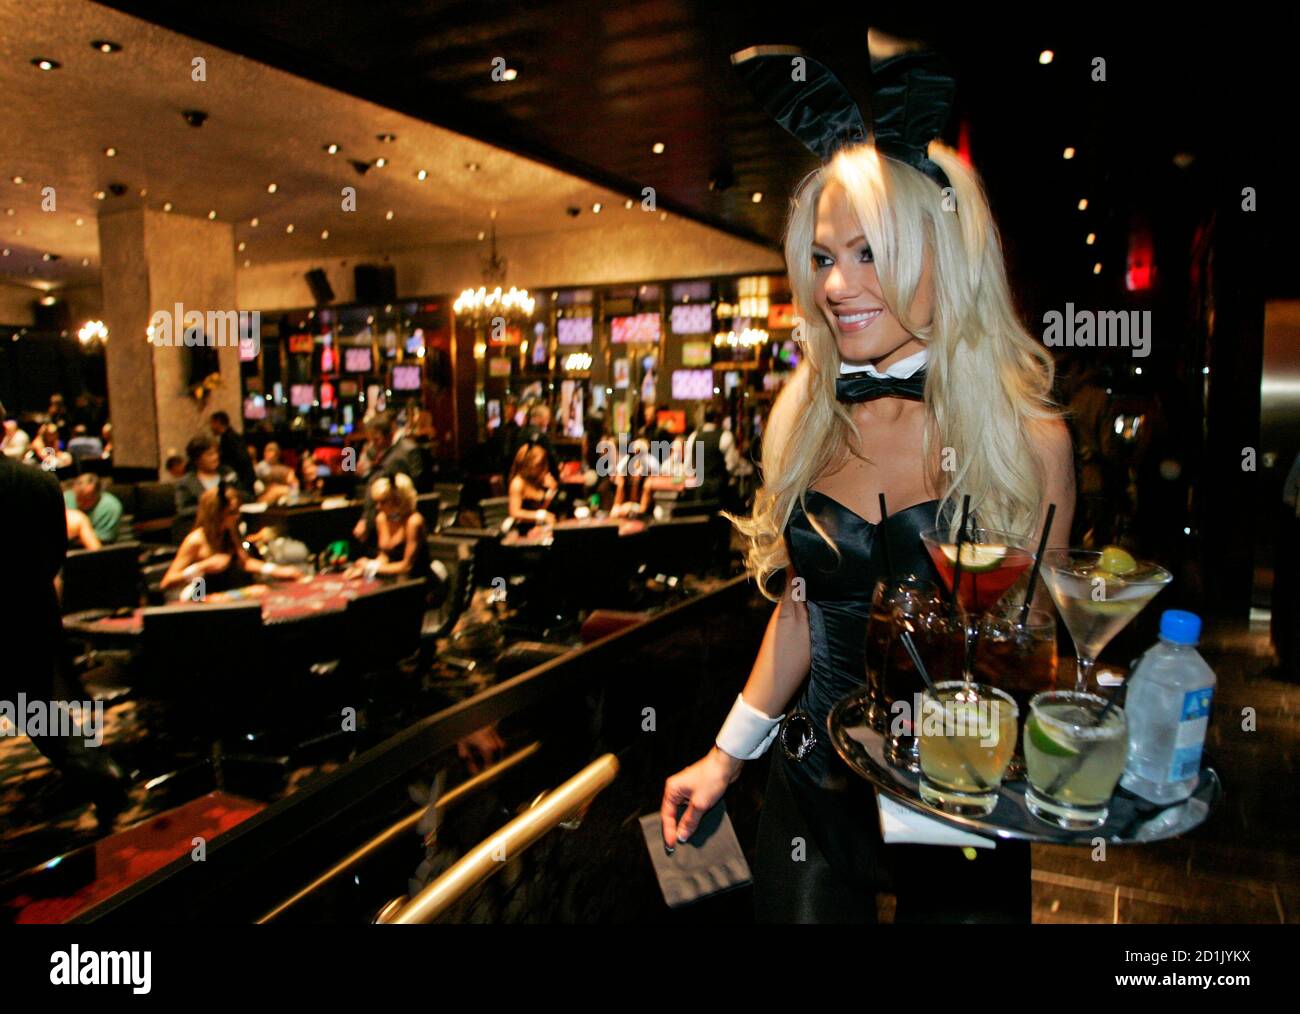 Beverage server Katie Putnam brings drinks to the gaming floor at the new  Playboy Club in Las Vegas October 5, 2006. The club, in the Palms Casino  Resort's Fantasy Tower, opens October